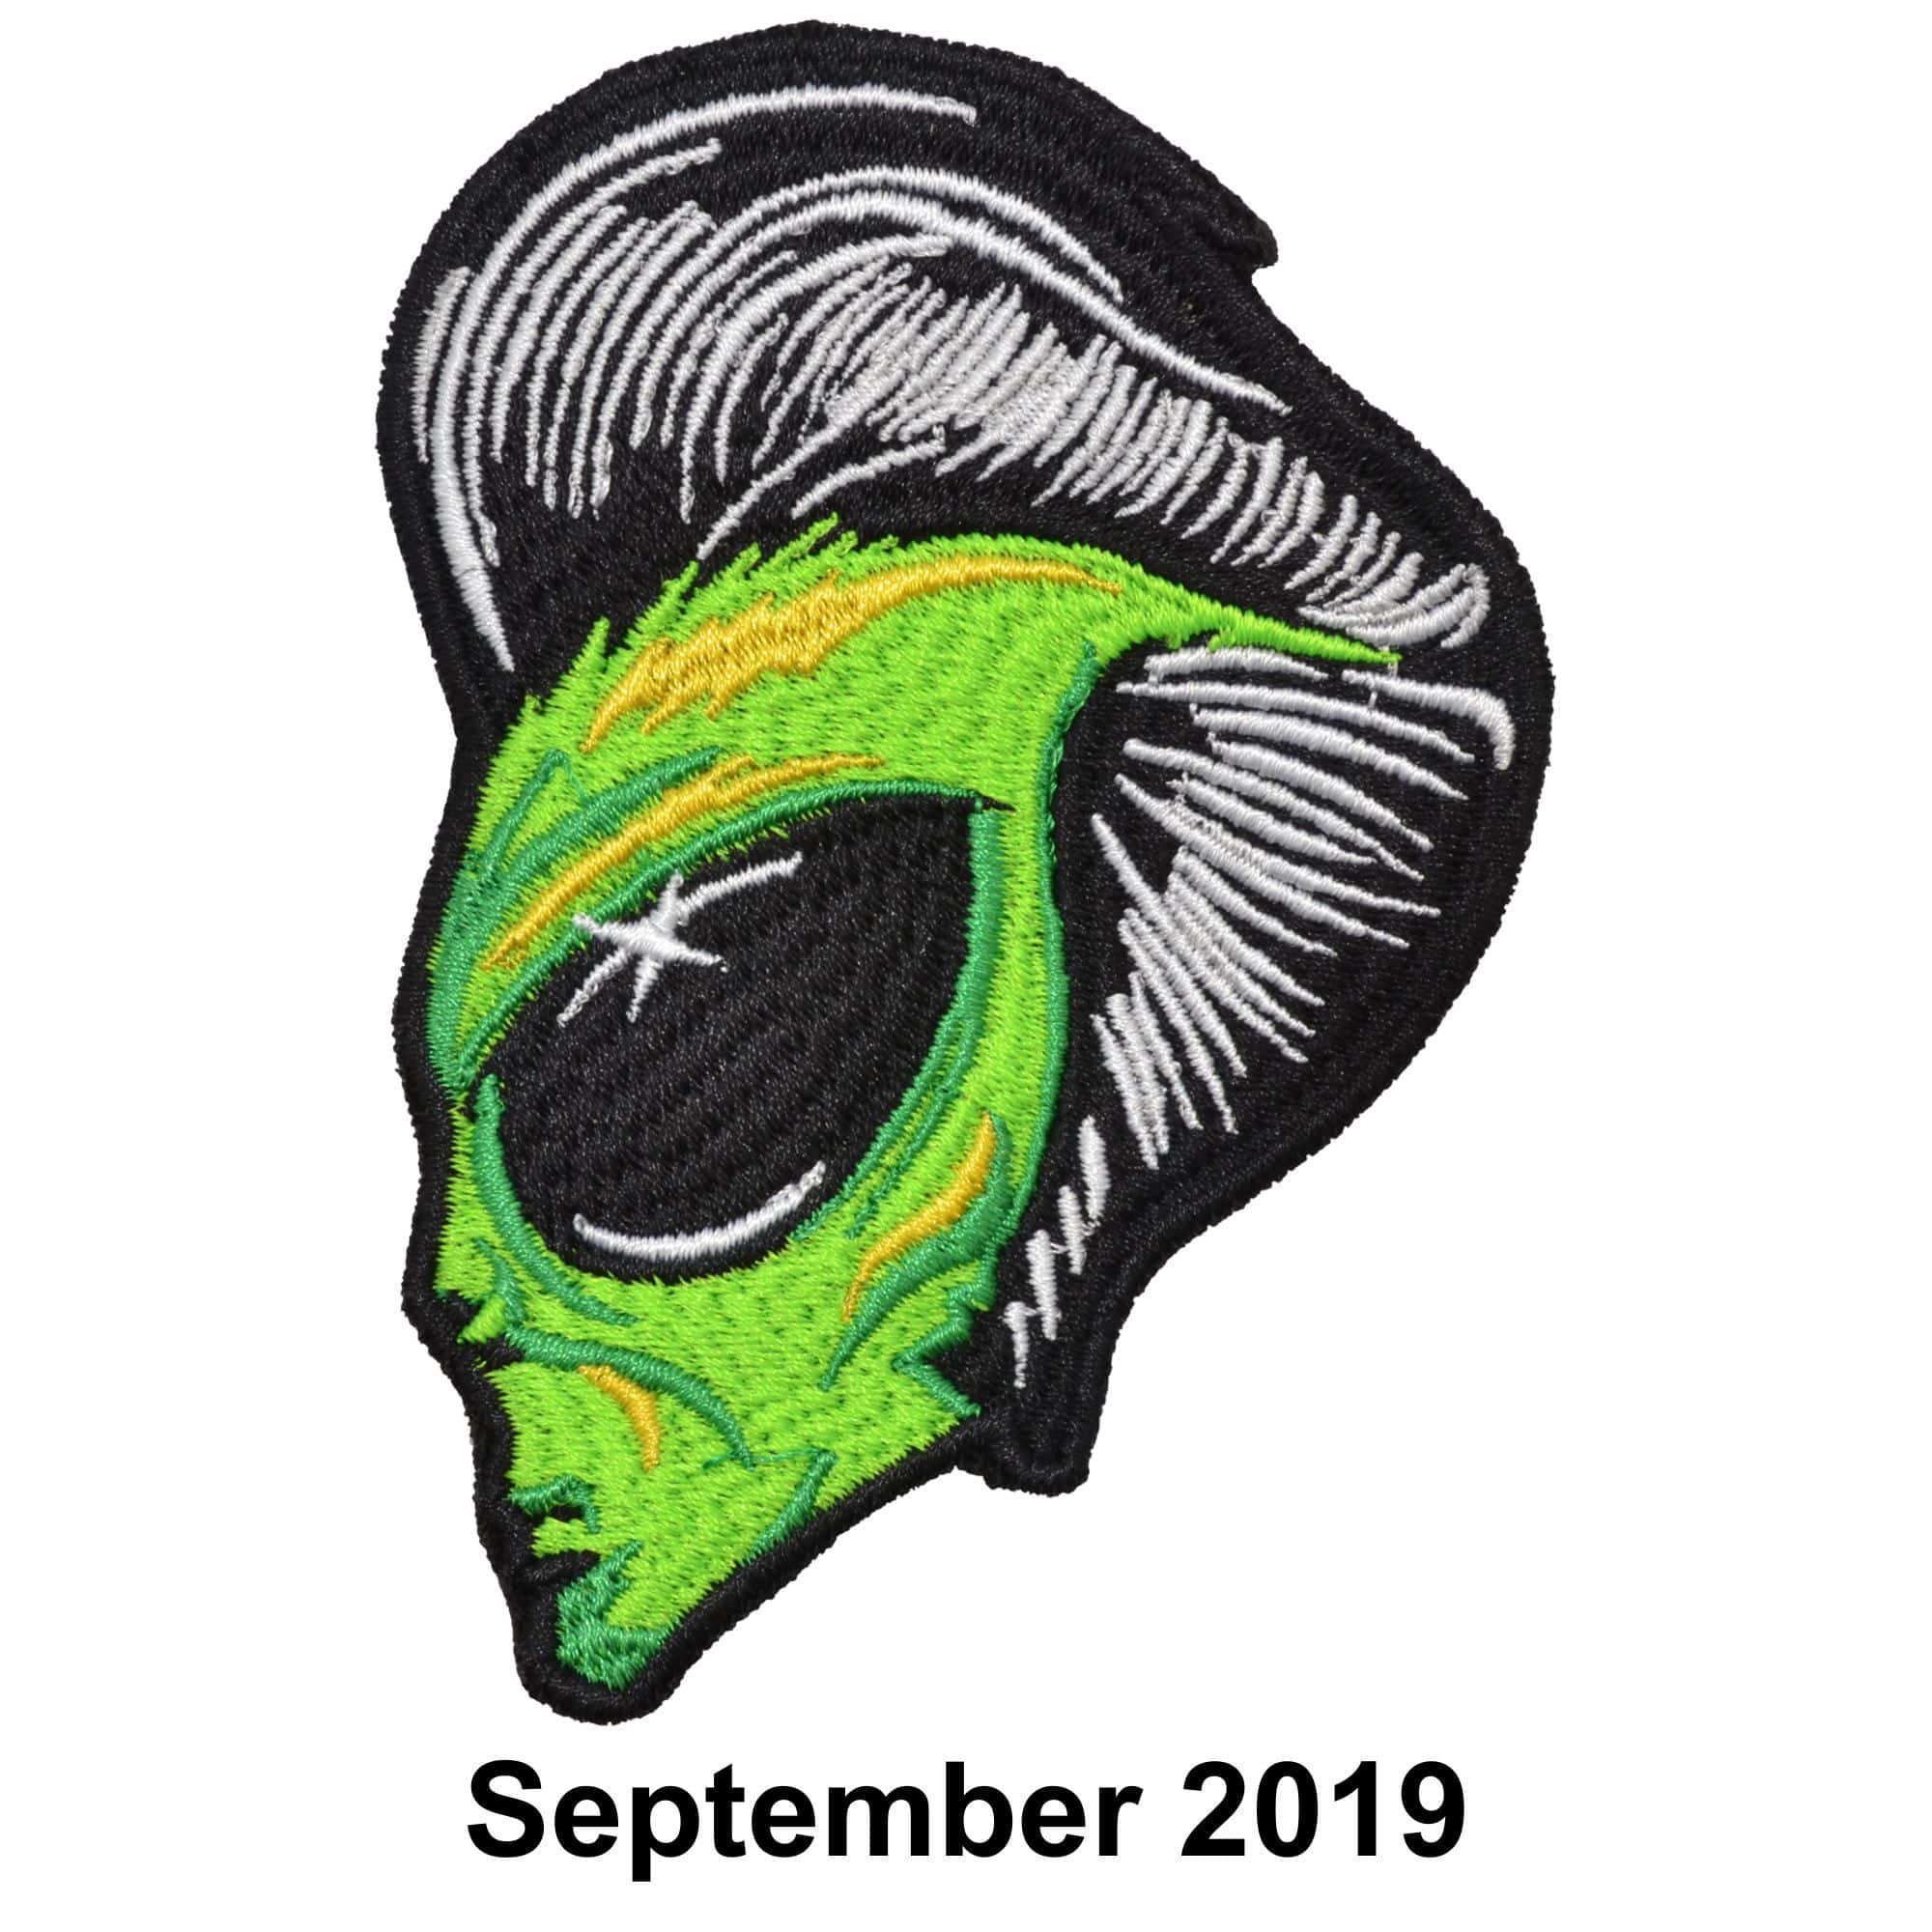 September 2019 Patch of the Month - Alien With Pompadour